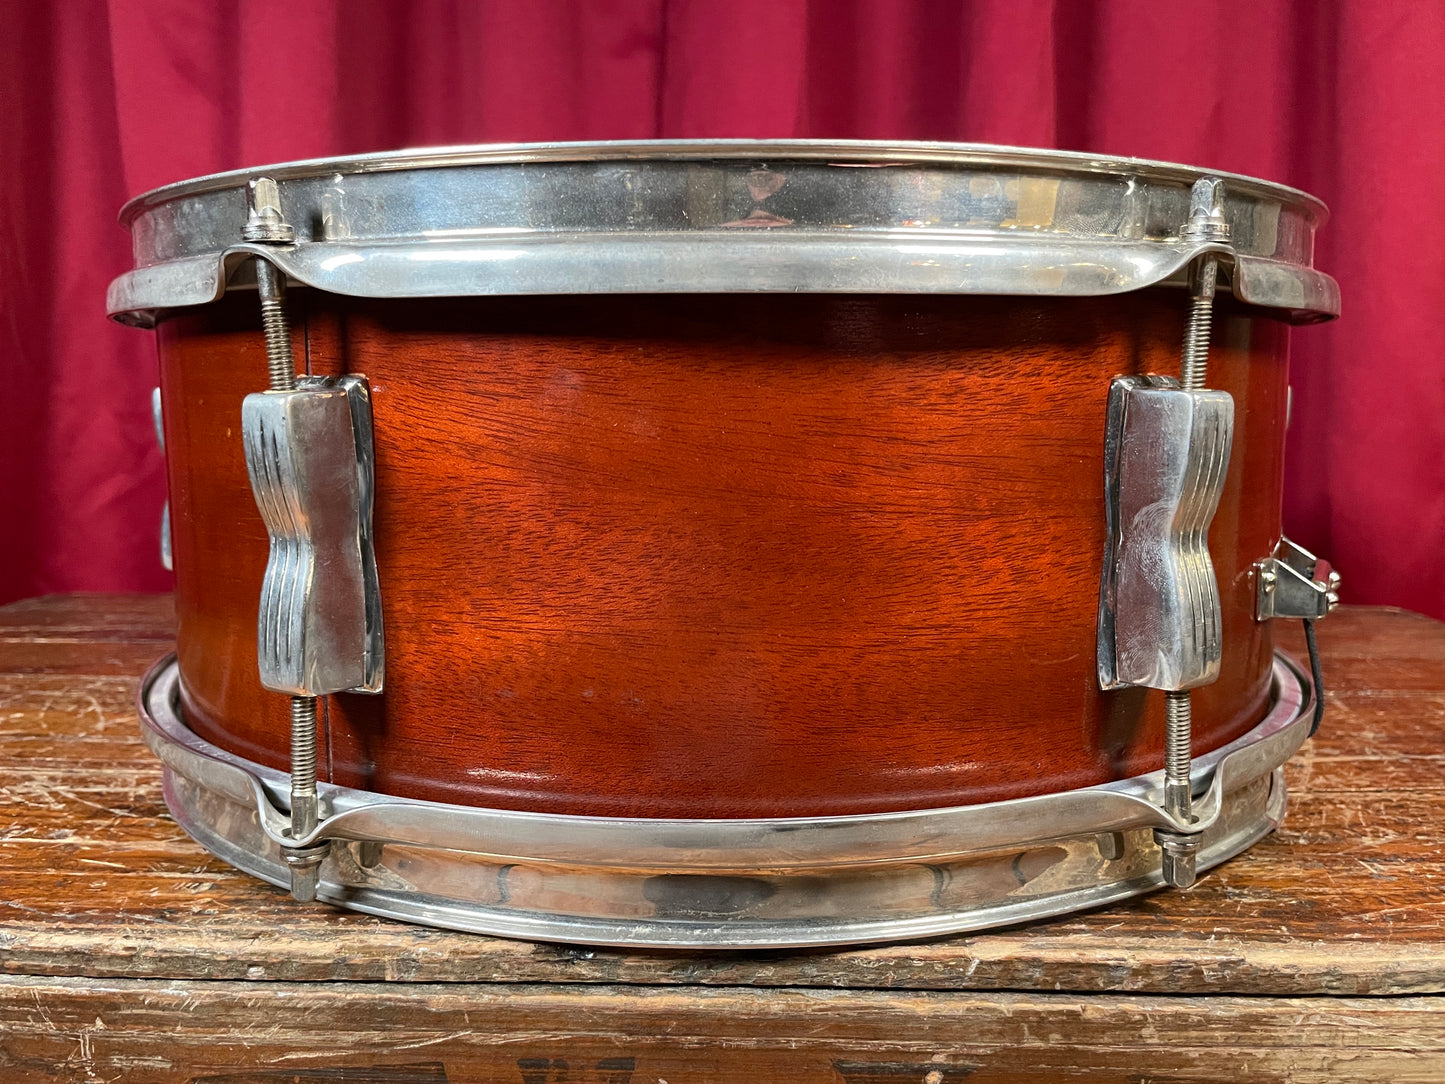 1957 WFL Ludwig 5.5x14 Model 491 Supreme Concert / Pioneer Snare Drum Mahogany